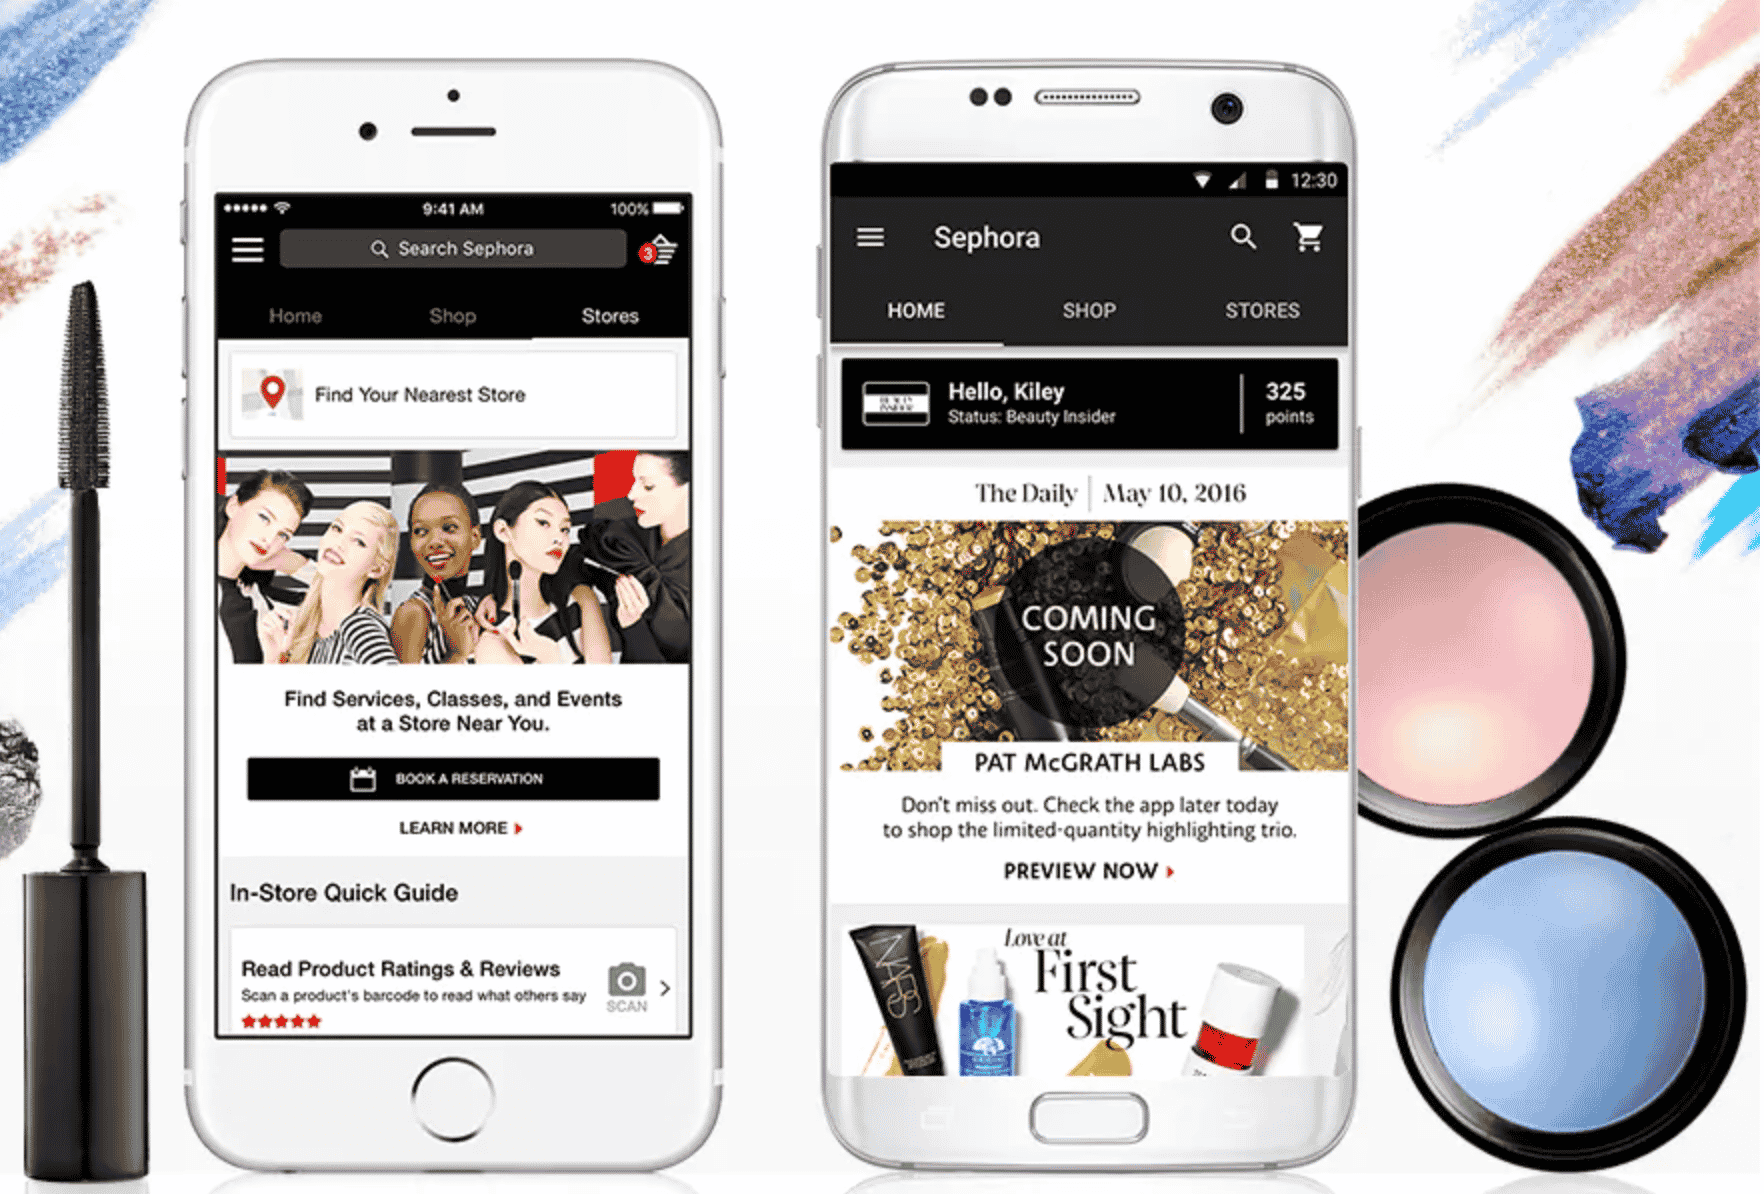 Sephora Business Modelll - Sephora Business Model POSTED ON